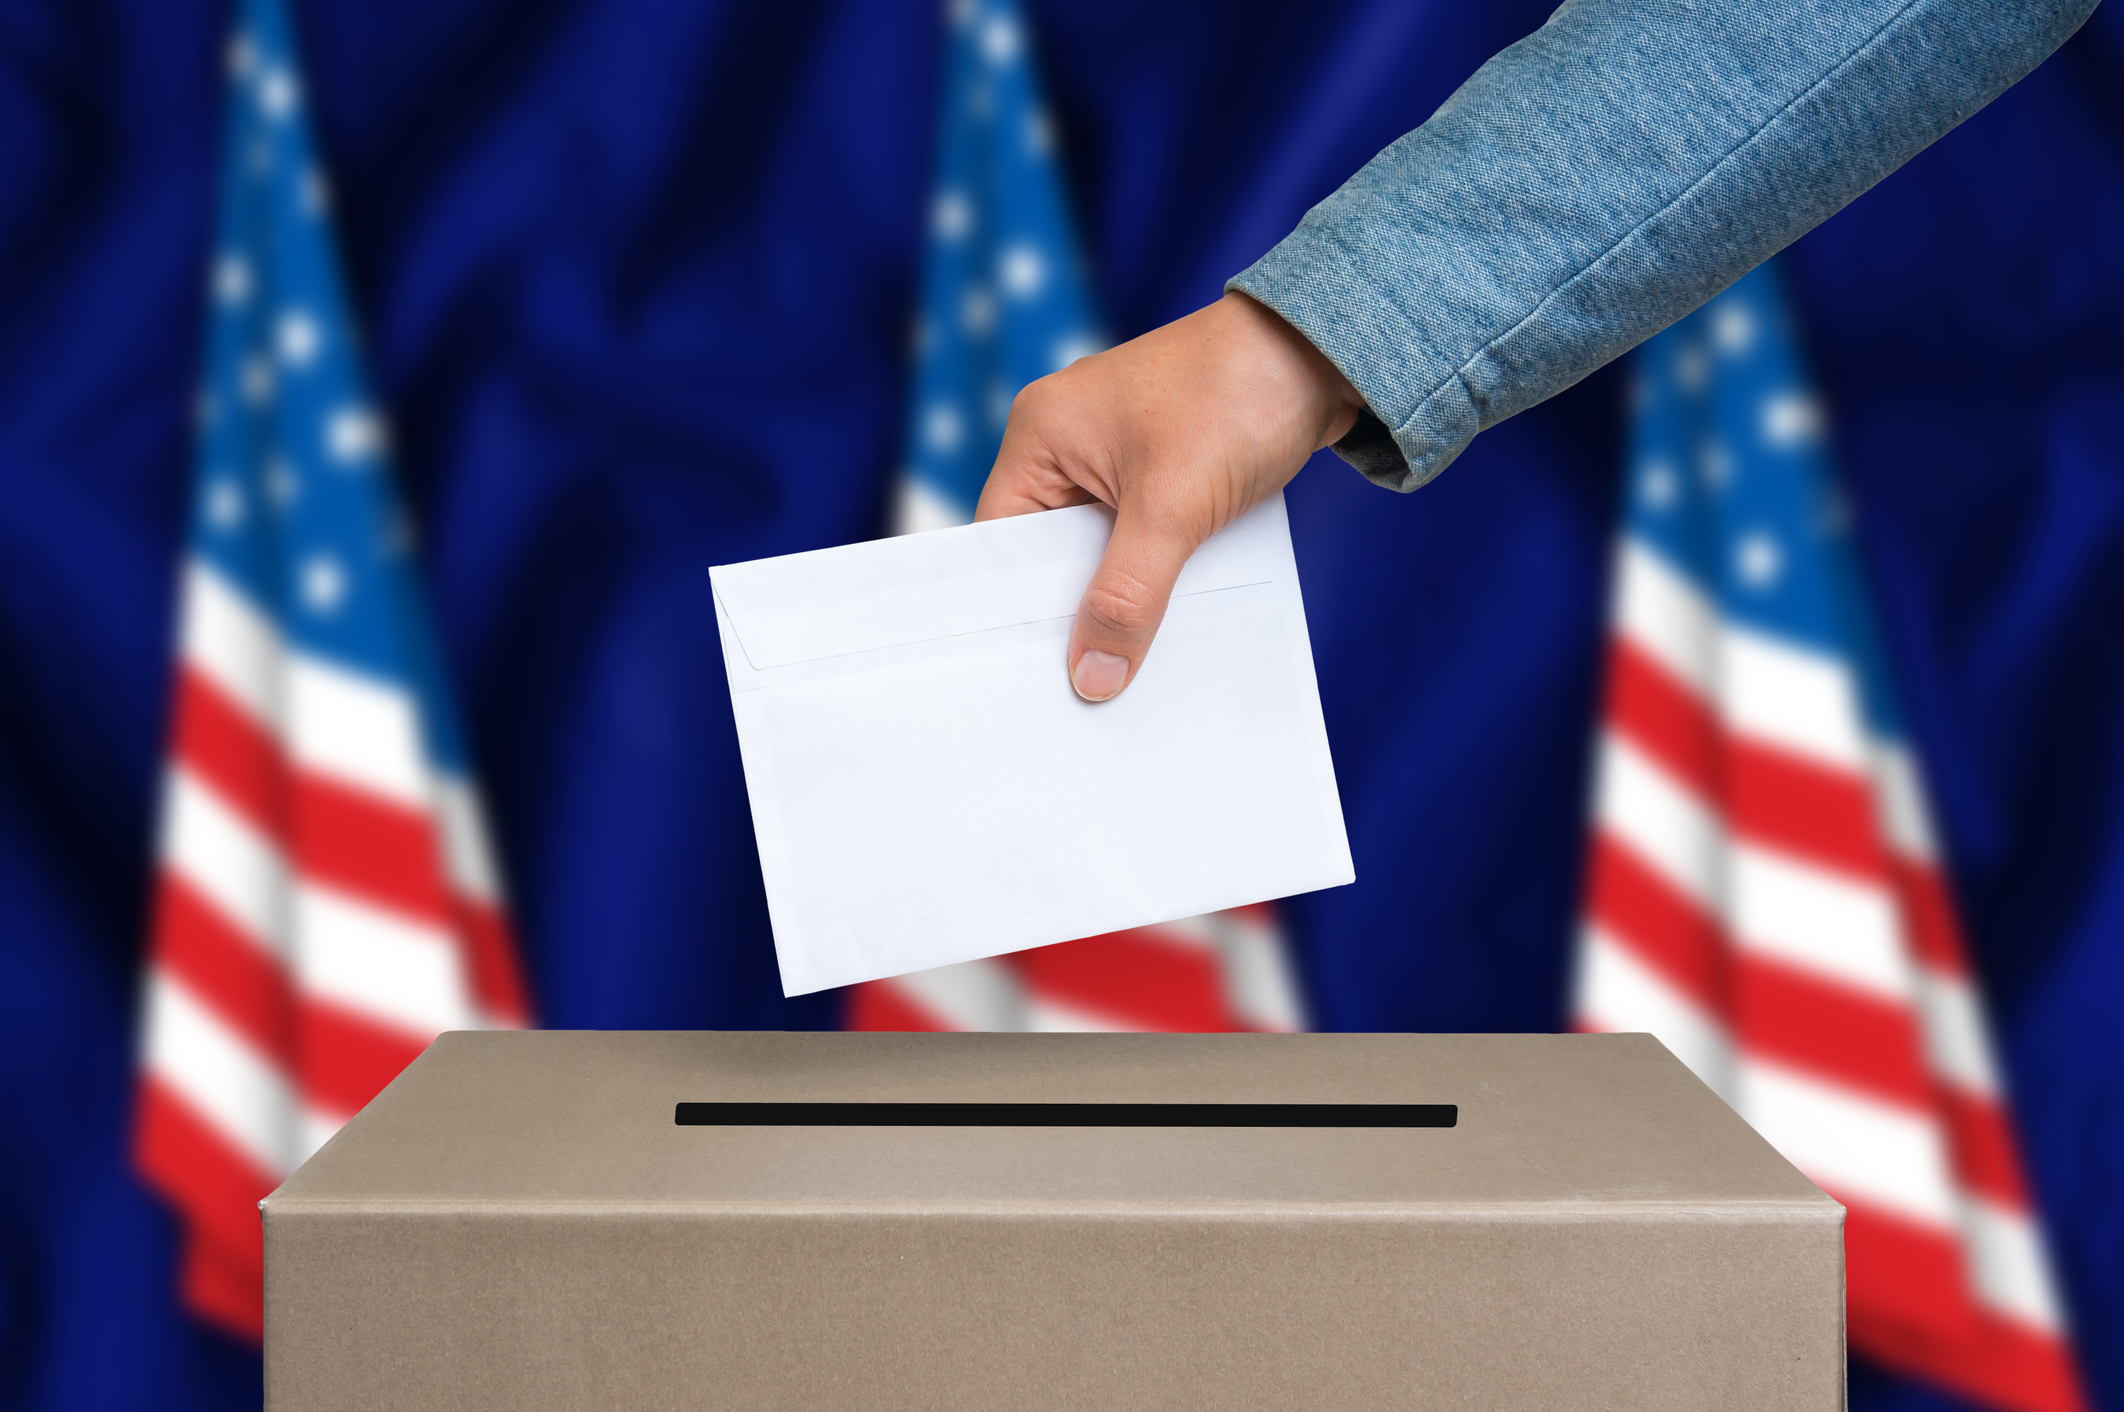 Image of Ballot Box with American Flags